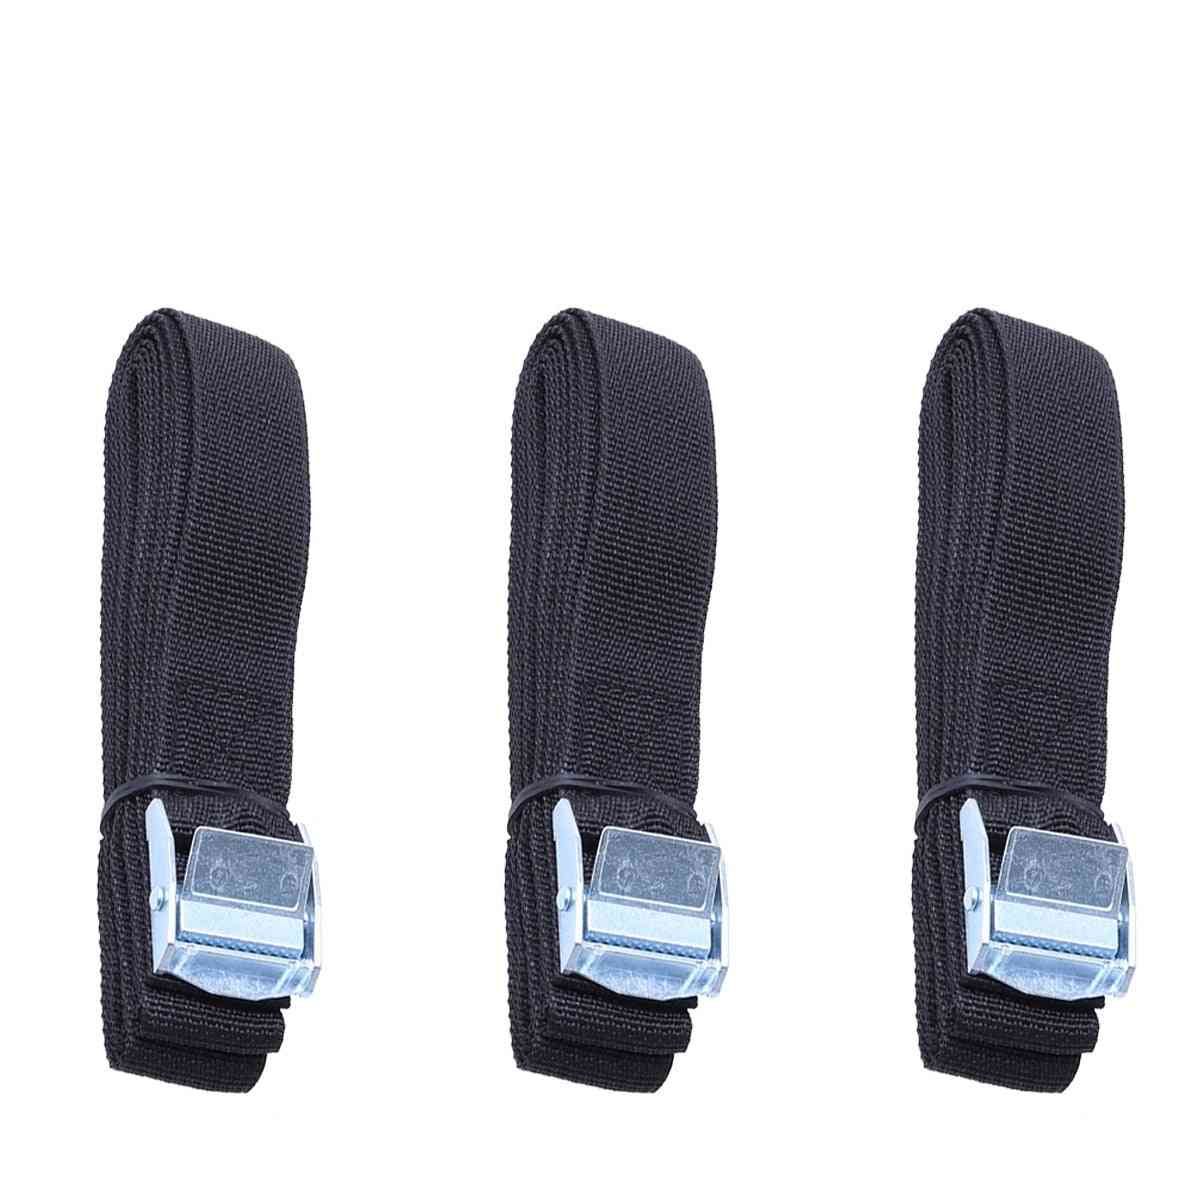 6pcs Polyester Quick Release Lashing With Buckle Tying Straps For Cargo Luggage